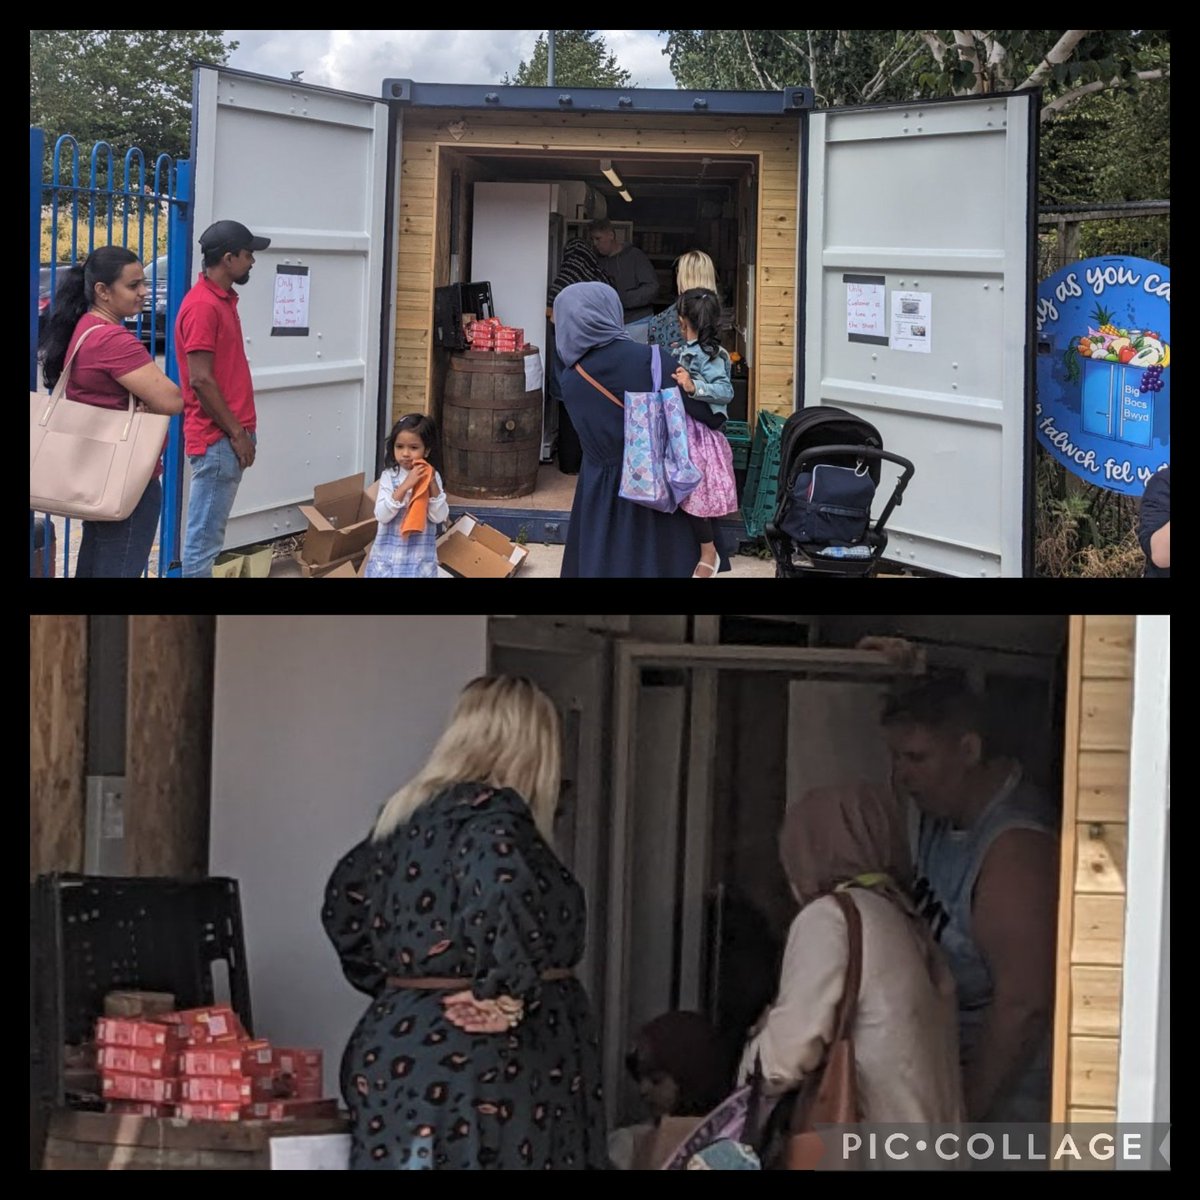 Another busy afternoon in Big Bocs Maindee providing good food choices for our community.🥦🌽🥕🥔

#NoFoodWaste #HealthyCommUNITY